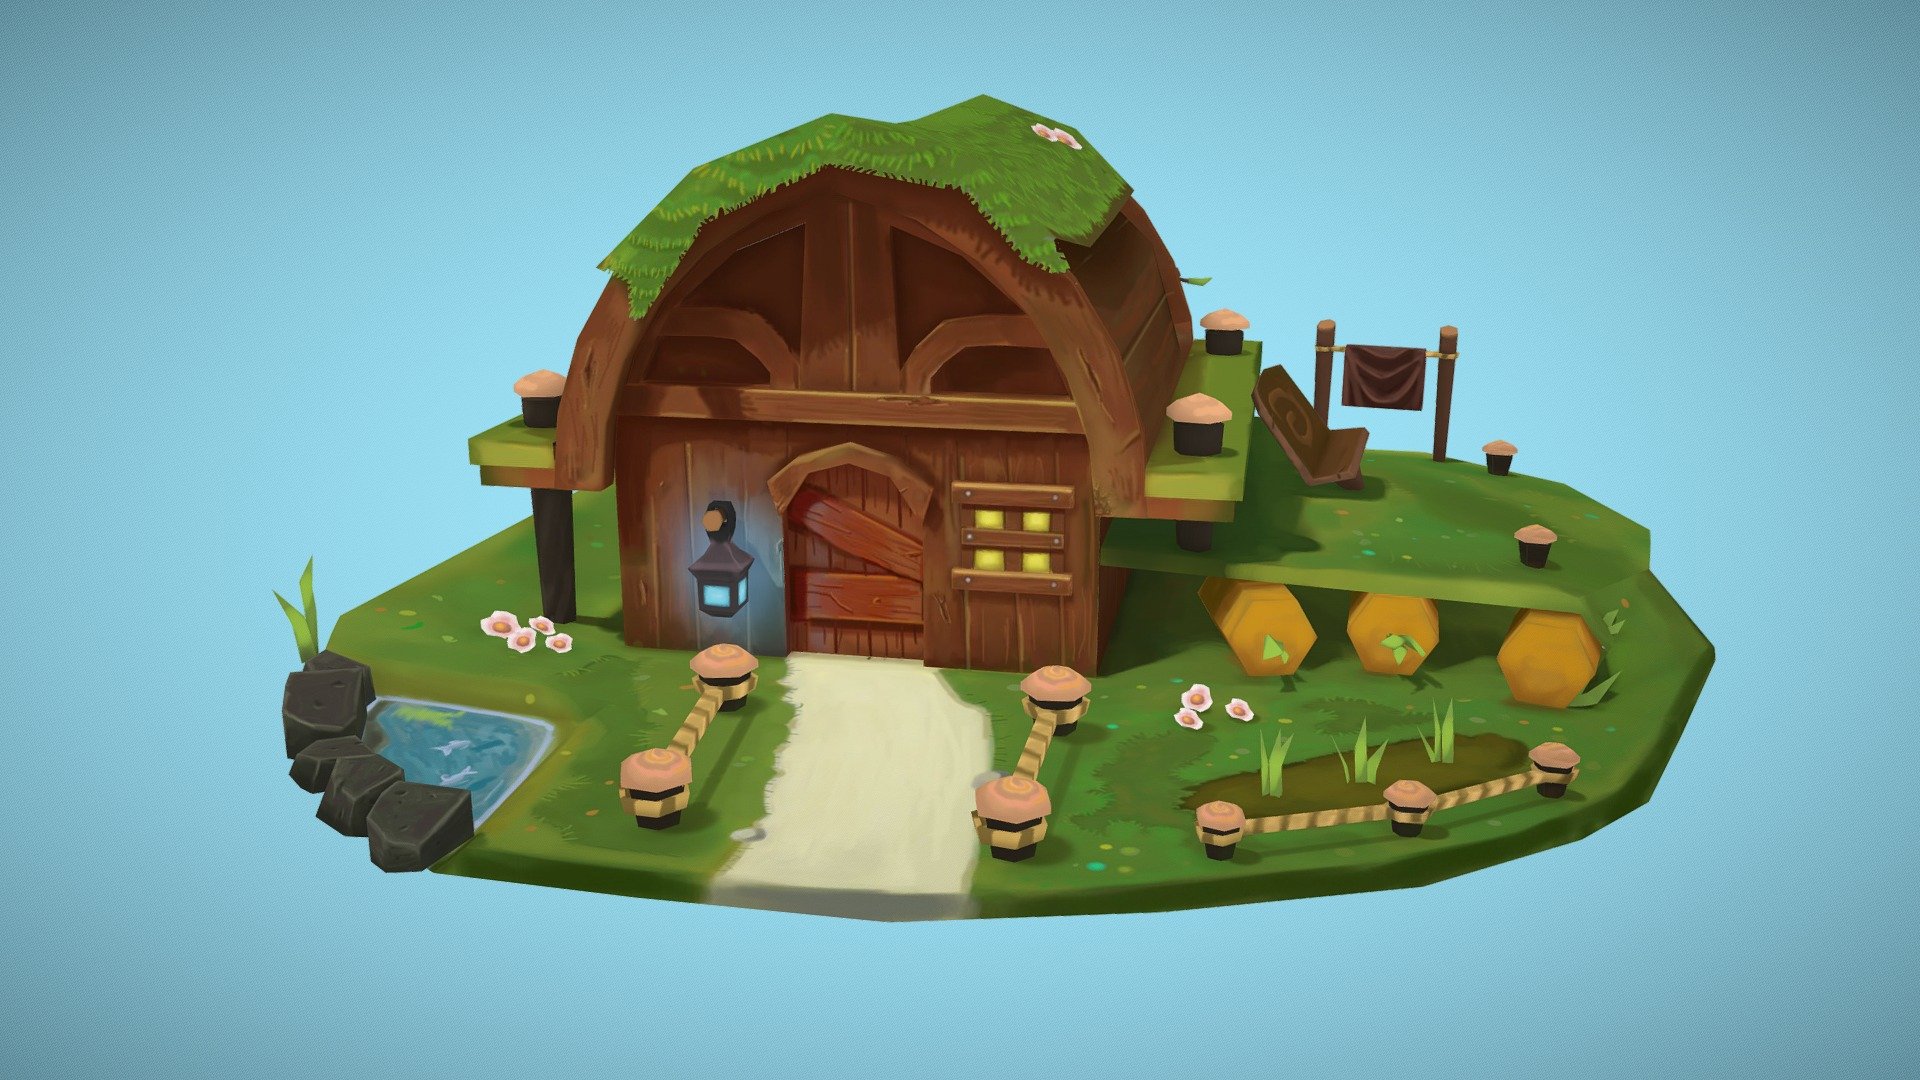 Personal project i made in hand painted textures style.
2d Concept made by: Corey Shillingford - Hand Painted Wood House Scene - 3D model by wintercg 3d model